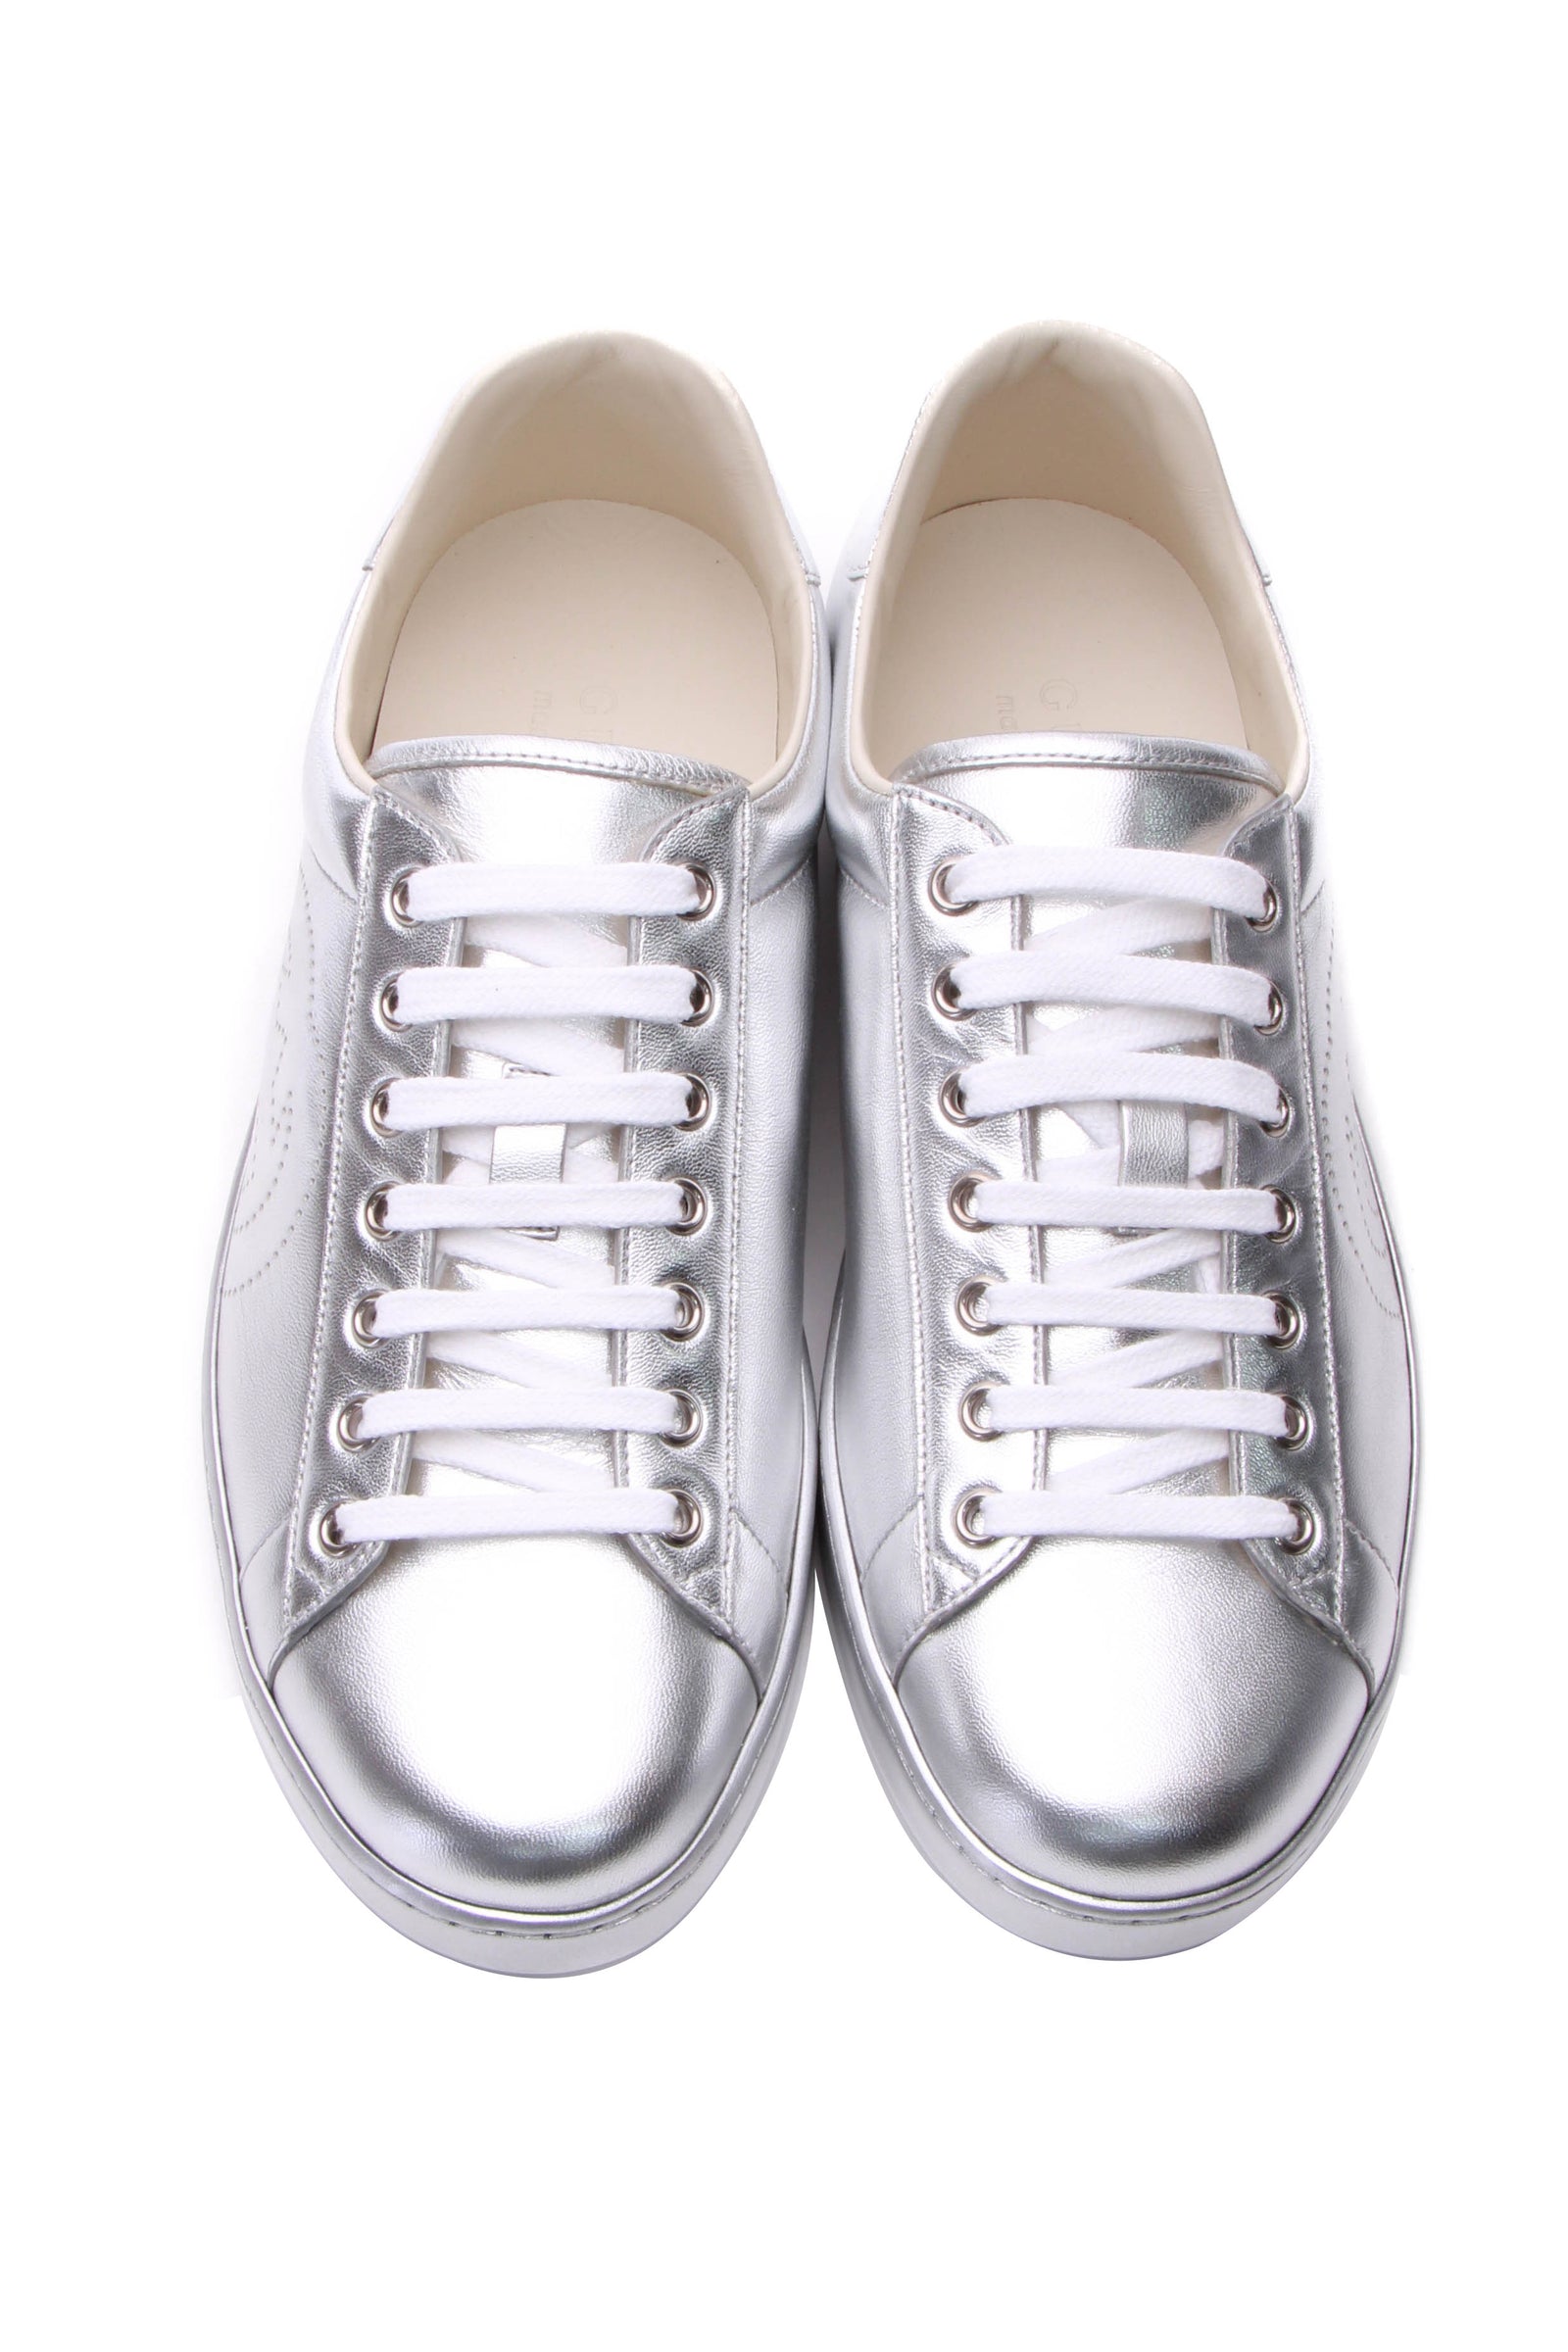 Louis Vuitton Beverly Hills Sneakers - White Sneakers, Shoes - LOU728000